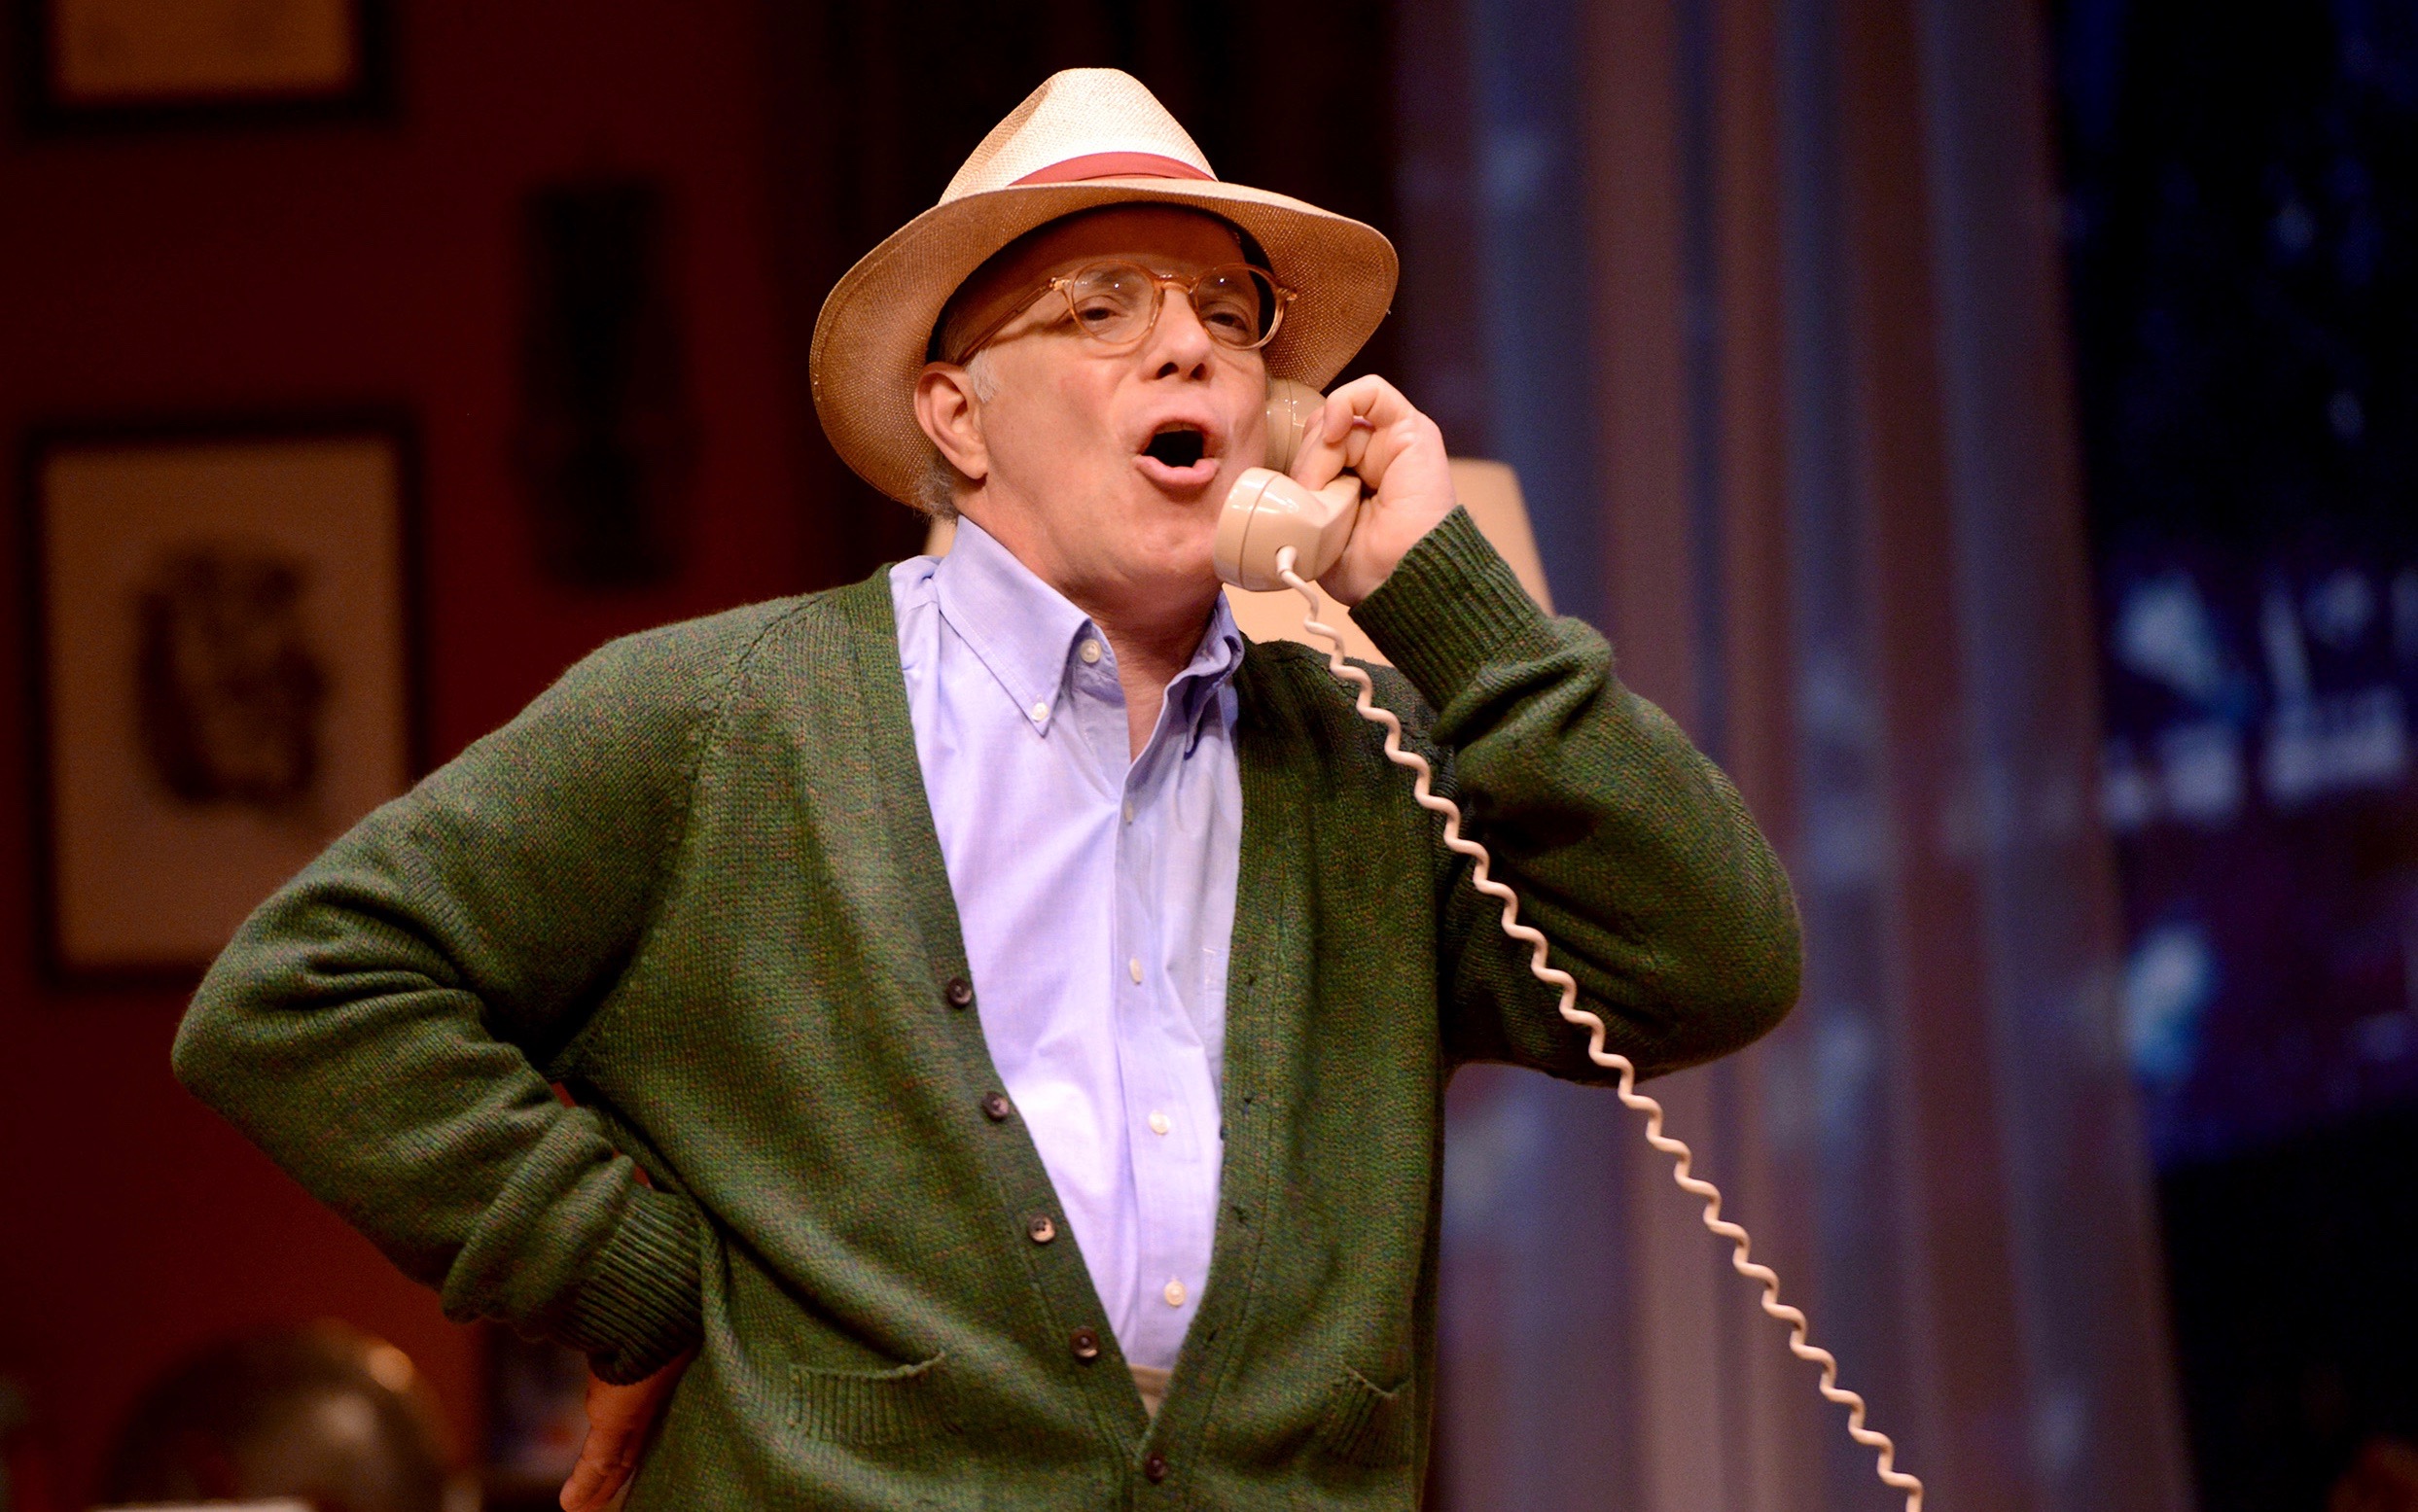 He's not ordering pizza; he's going bananas. Eddie Korbich plays an off-the-deep-end Truman Capote in "TRU" at The Public.